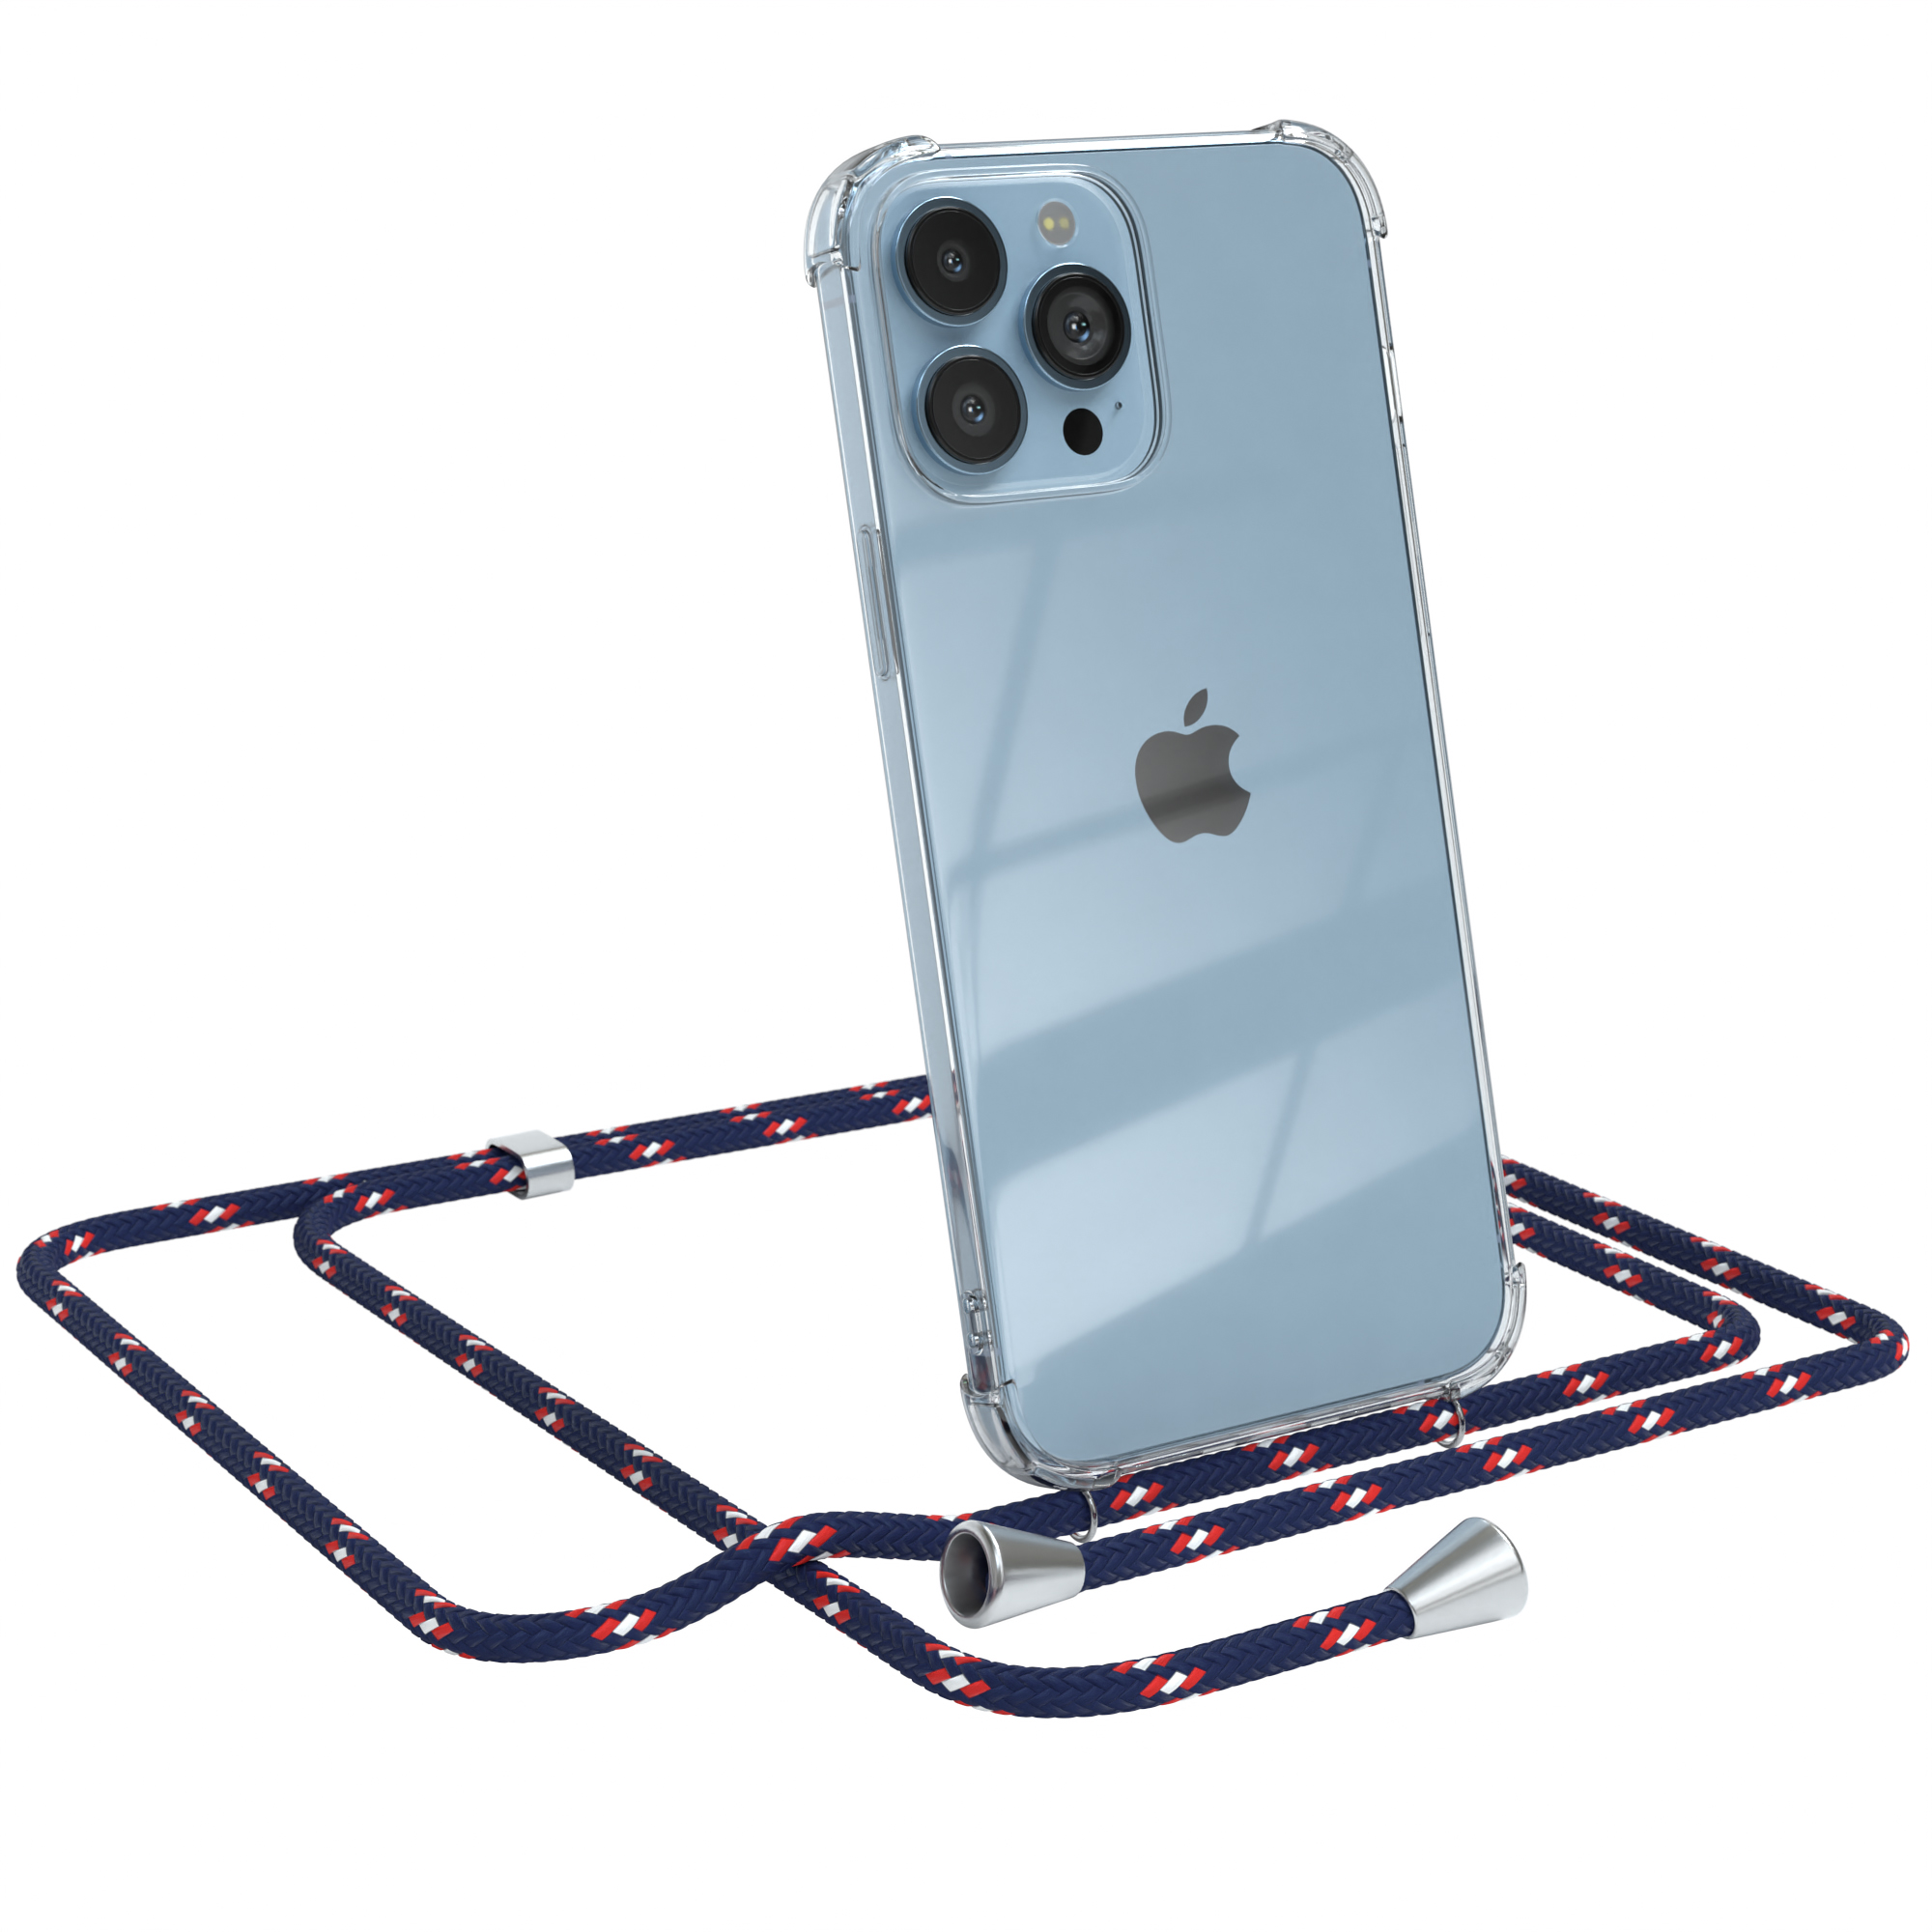 Camouflage Apple, Cover mit Pro Max, Clips 13 Blau CASE / Umhängeband, Clear iPhone Umhängetasche, Silber EAZY